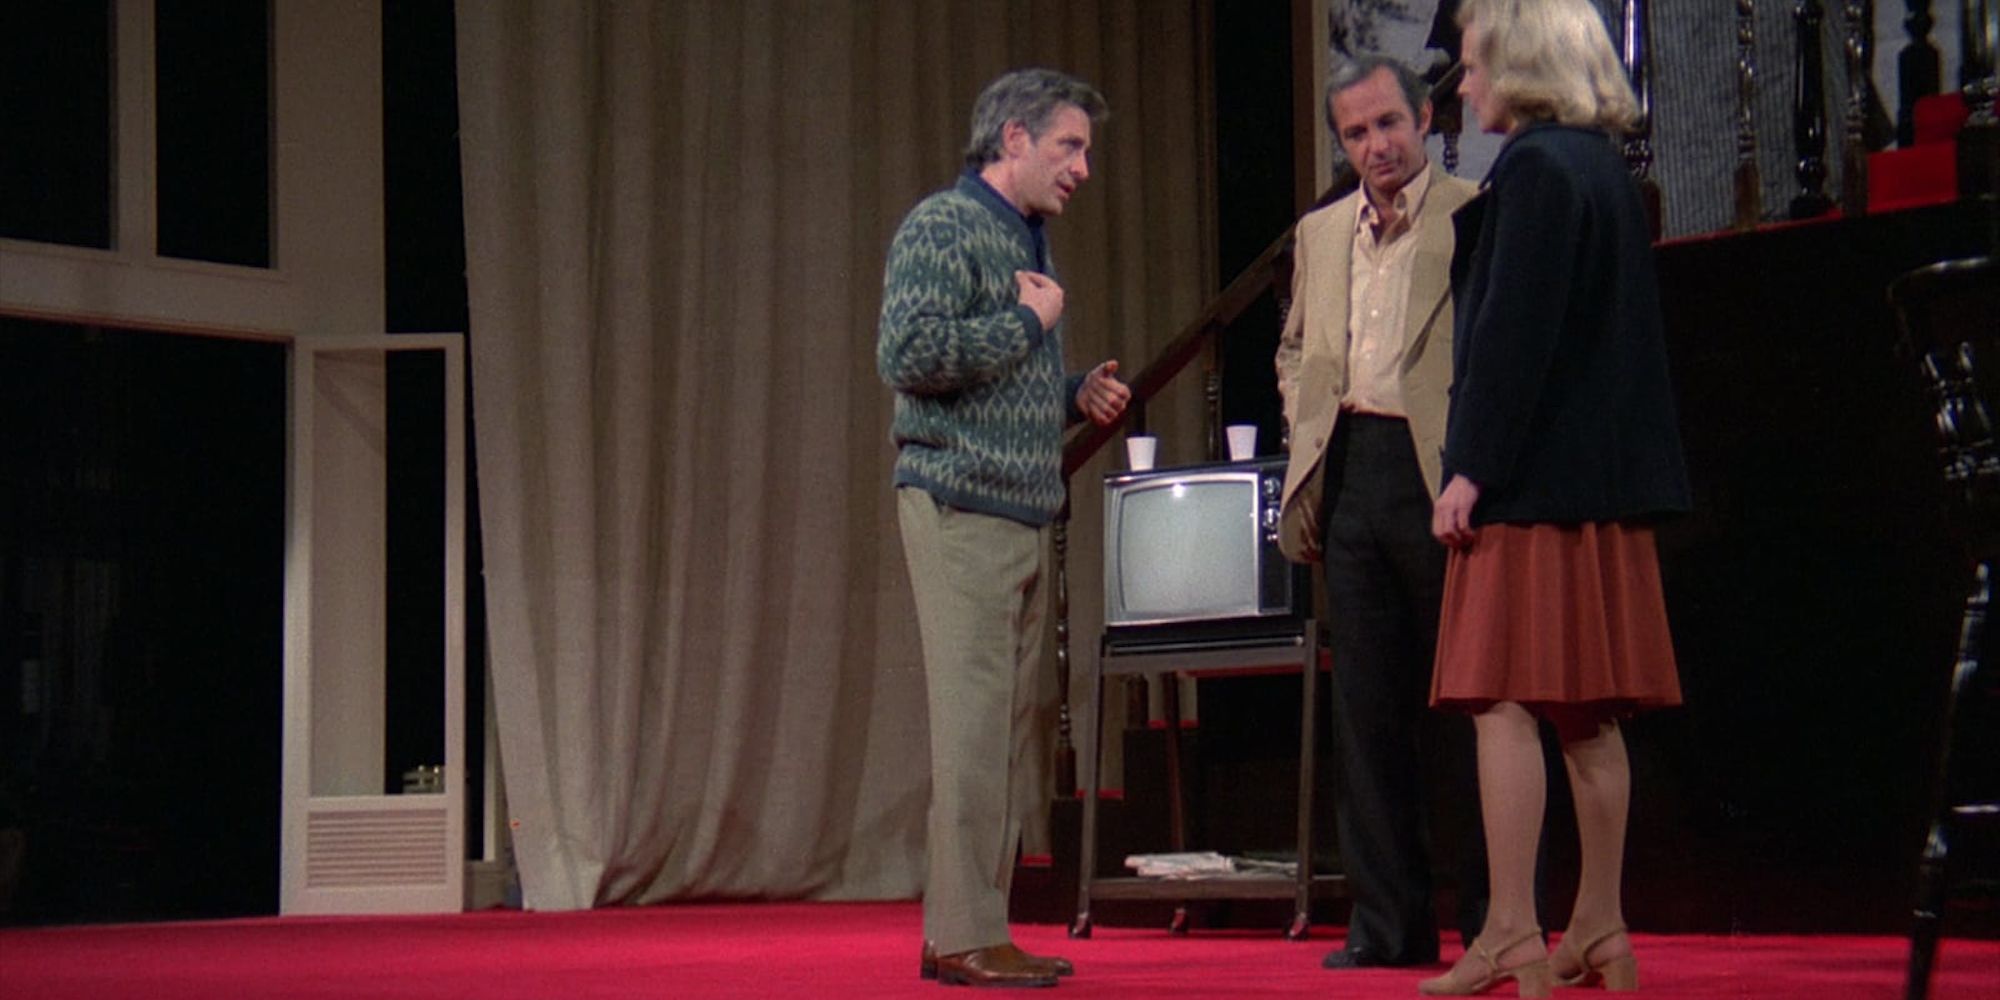 Gena Rowlands, John Cassavetes, and Ben Gazzara as Myrtle, Maurice, and Manny, standing and talking in Opening Night